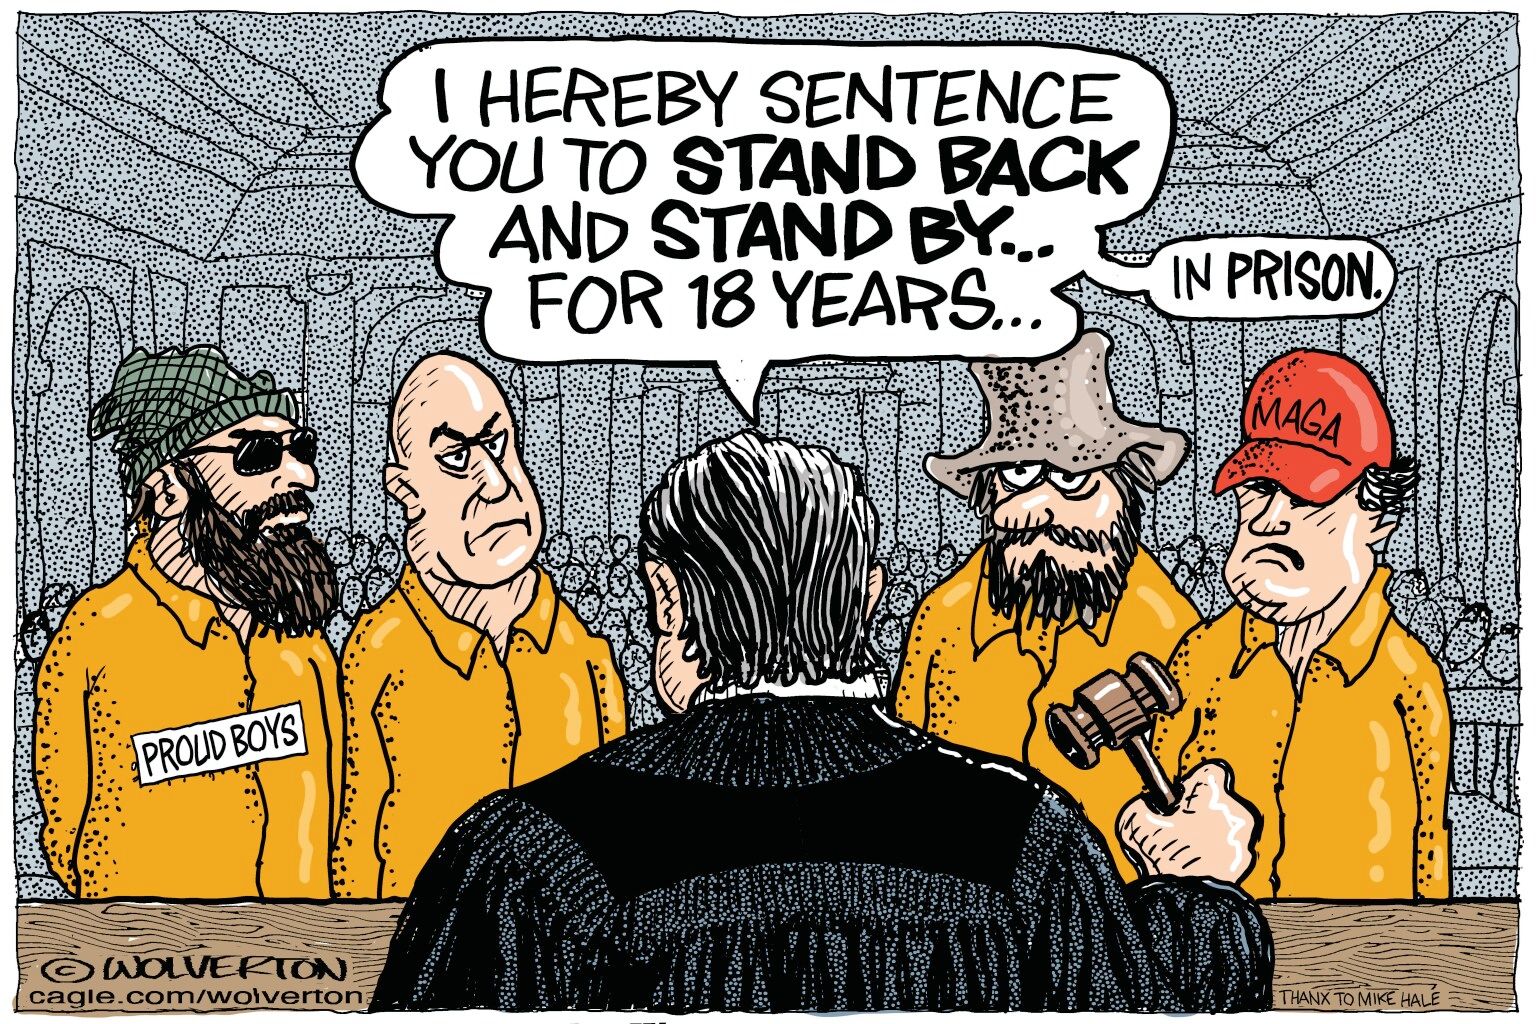 Stand Back and Stand By  - newsjustin.press political cartoon